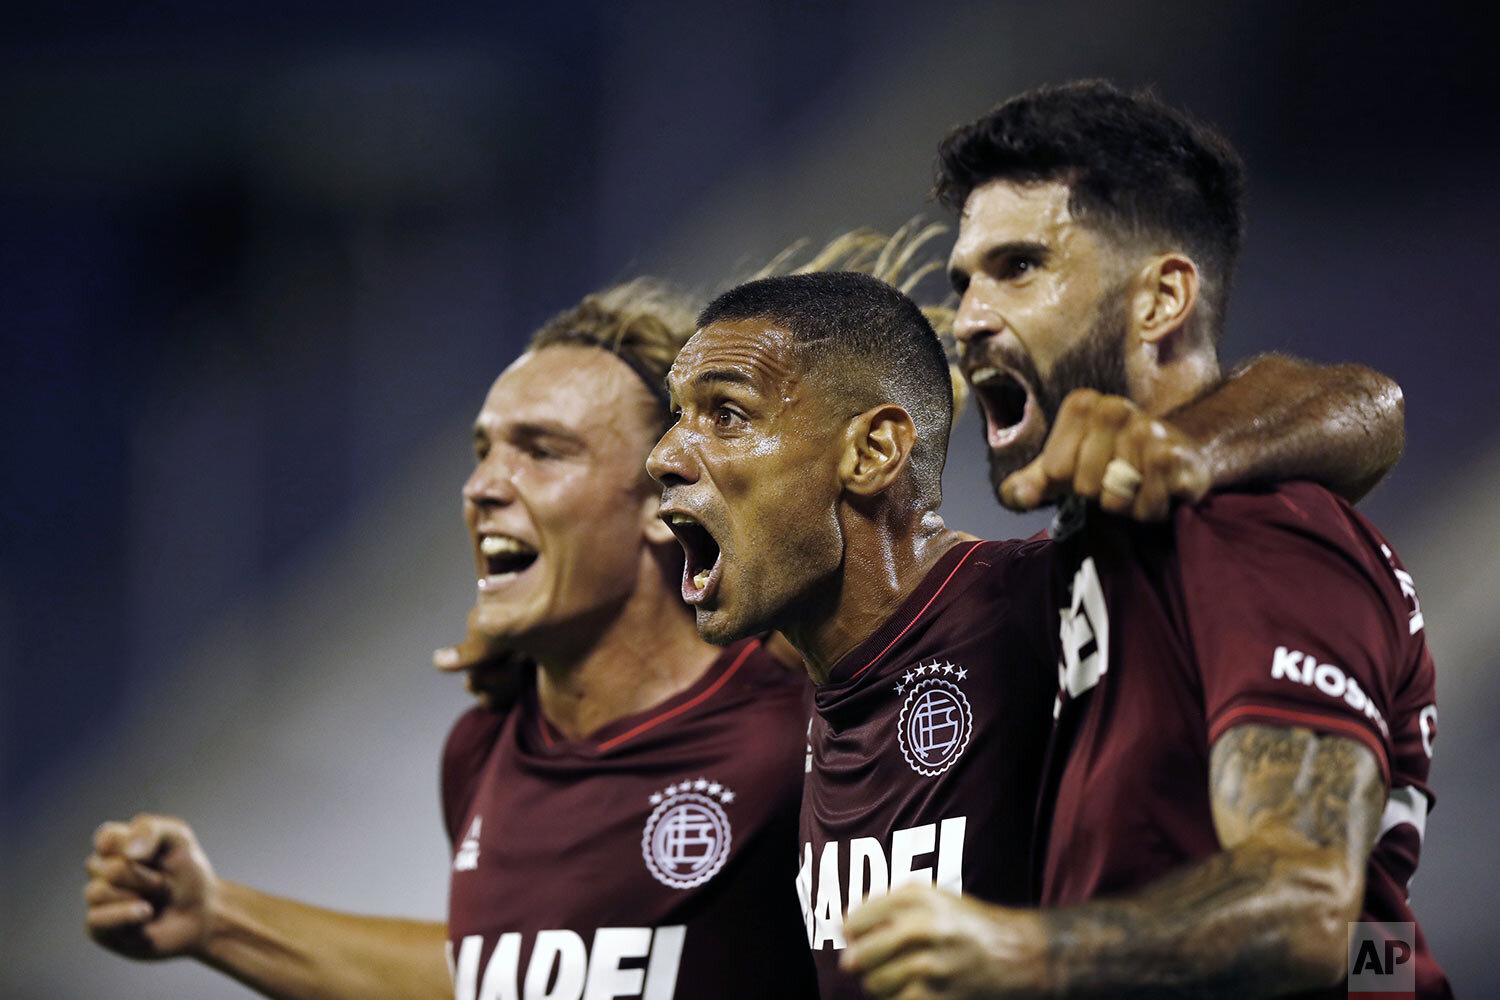  Jose Sand of Argentina's Lanus, center, celebrates with teammates after scoring his side's opening goal against Argentina's Velez Sarsfield at a Copa Sudamericana semifinal first leg soccer match at Jose Amalfitani stadium in Buenos Aires, Argentina